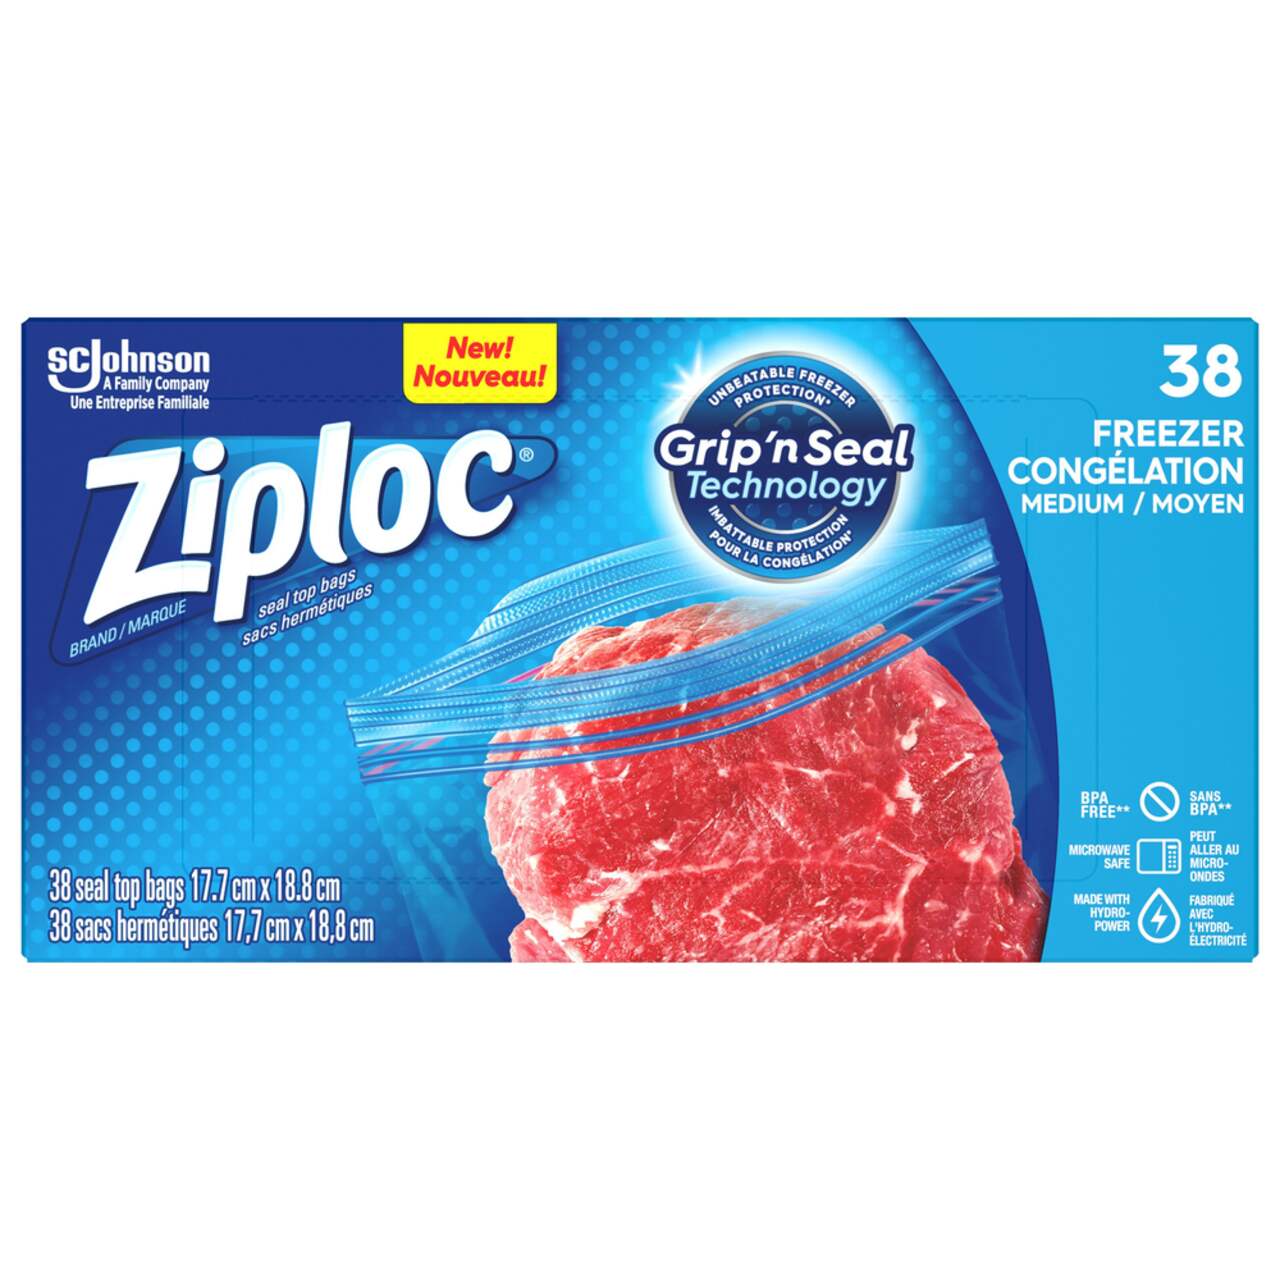 https://media-www.canadiantire.ca/product/living/home-essentials/household-consumables/0530930/ziploc-medium-freezer-bags-vp-38ct-49812806-8dae-4206-b029-9a4b7613d84c.png?imdensity=1&imwidth=640&impolicy=mZoom